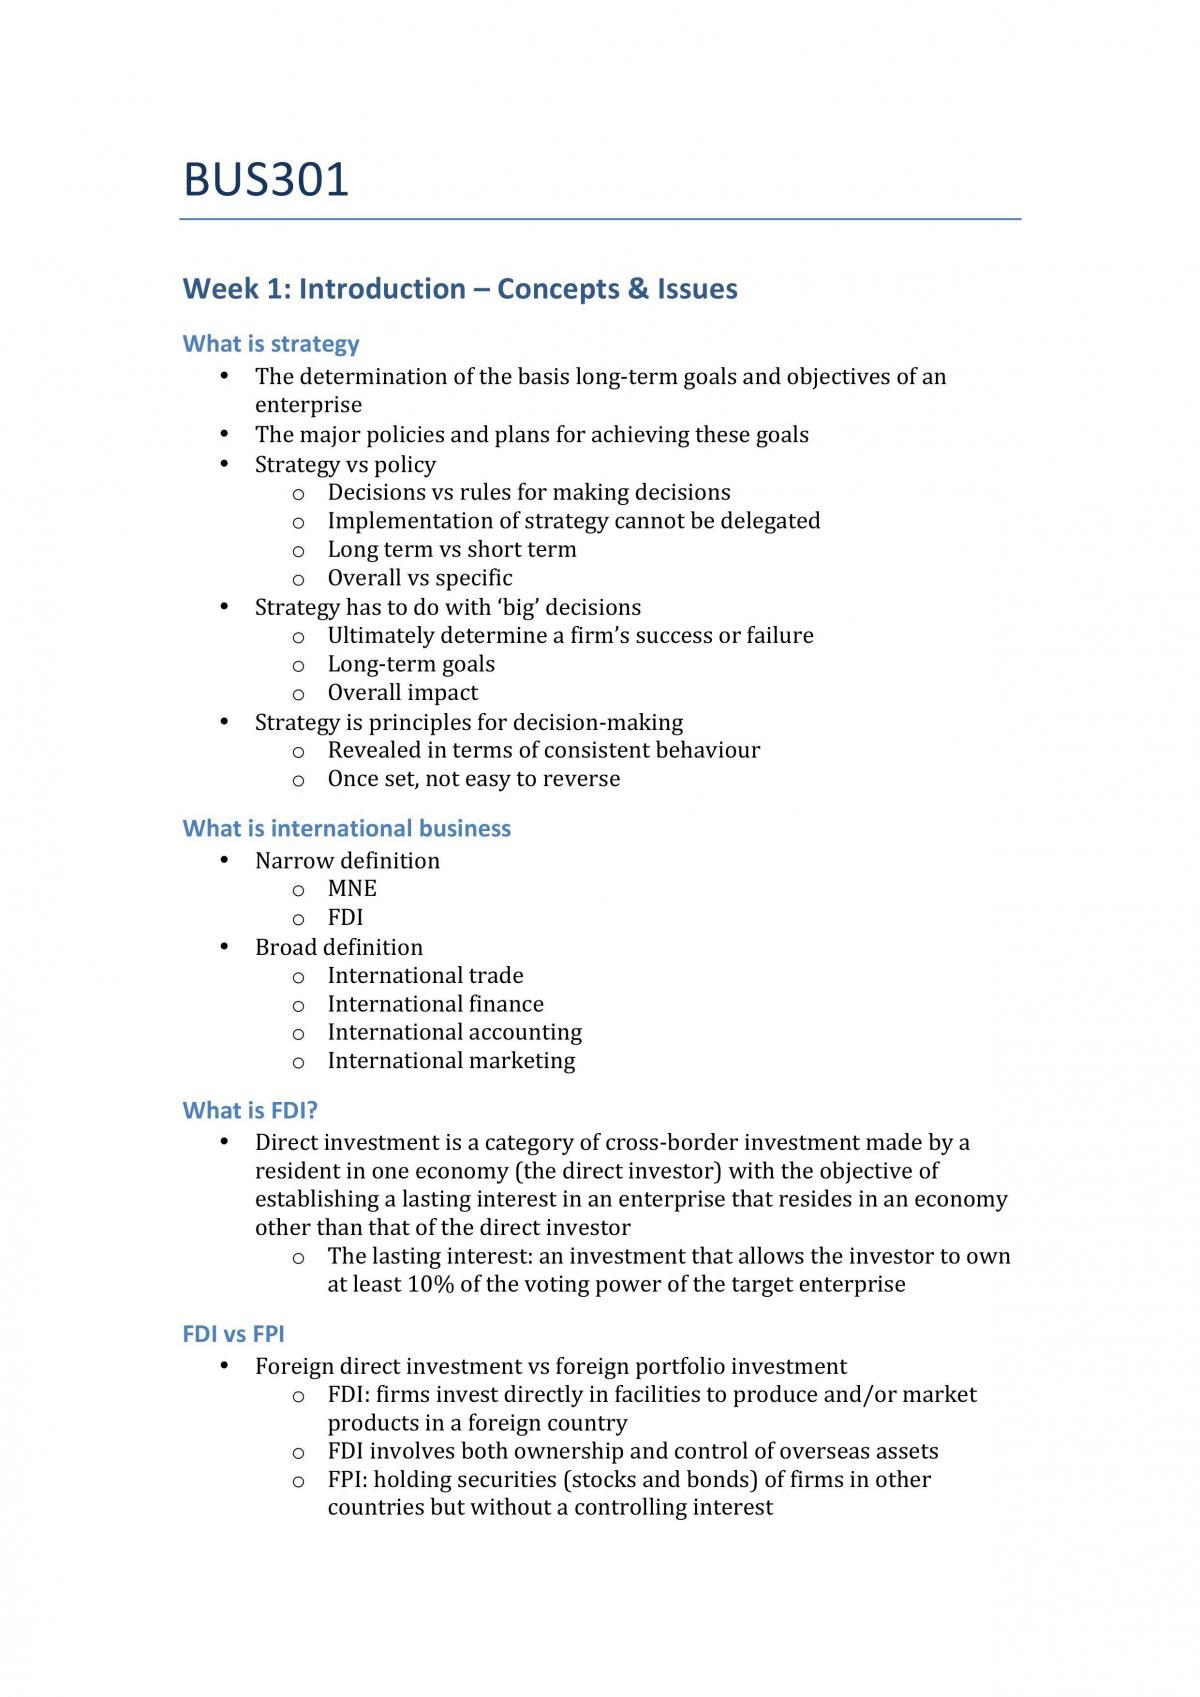 BUS301 Study Notes - Page 1